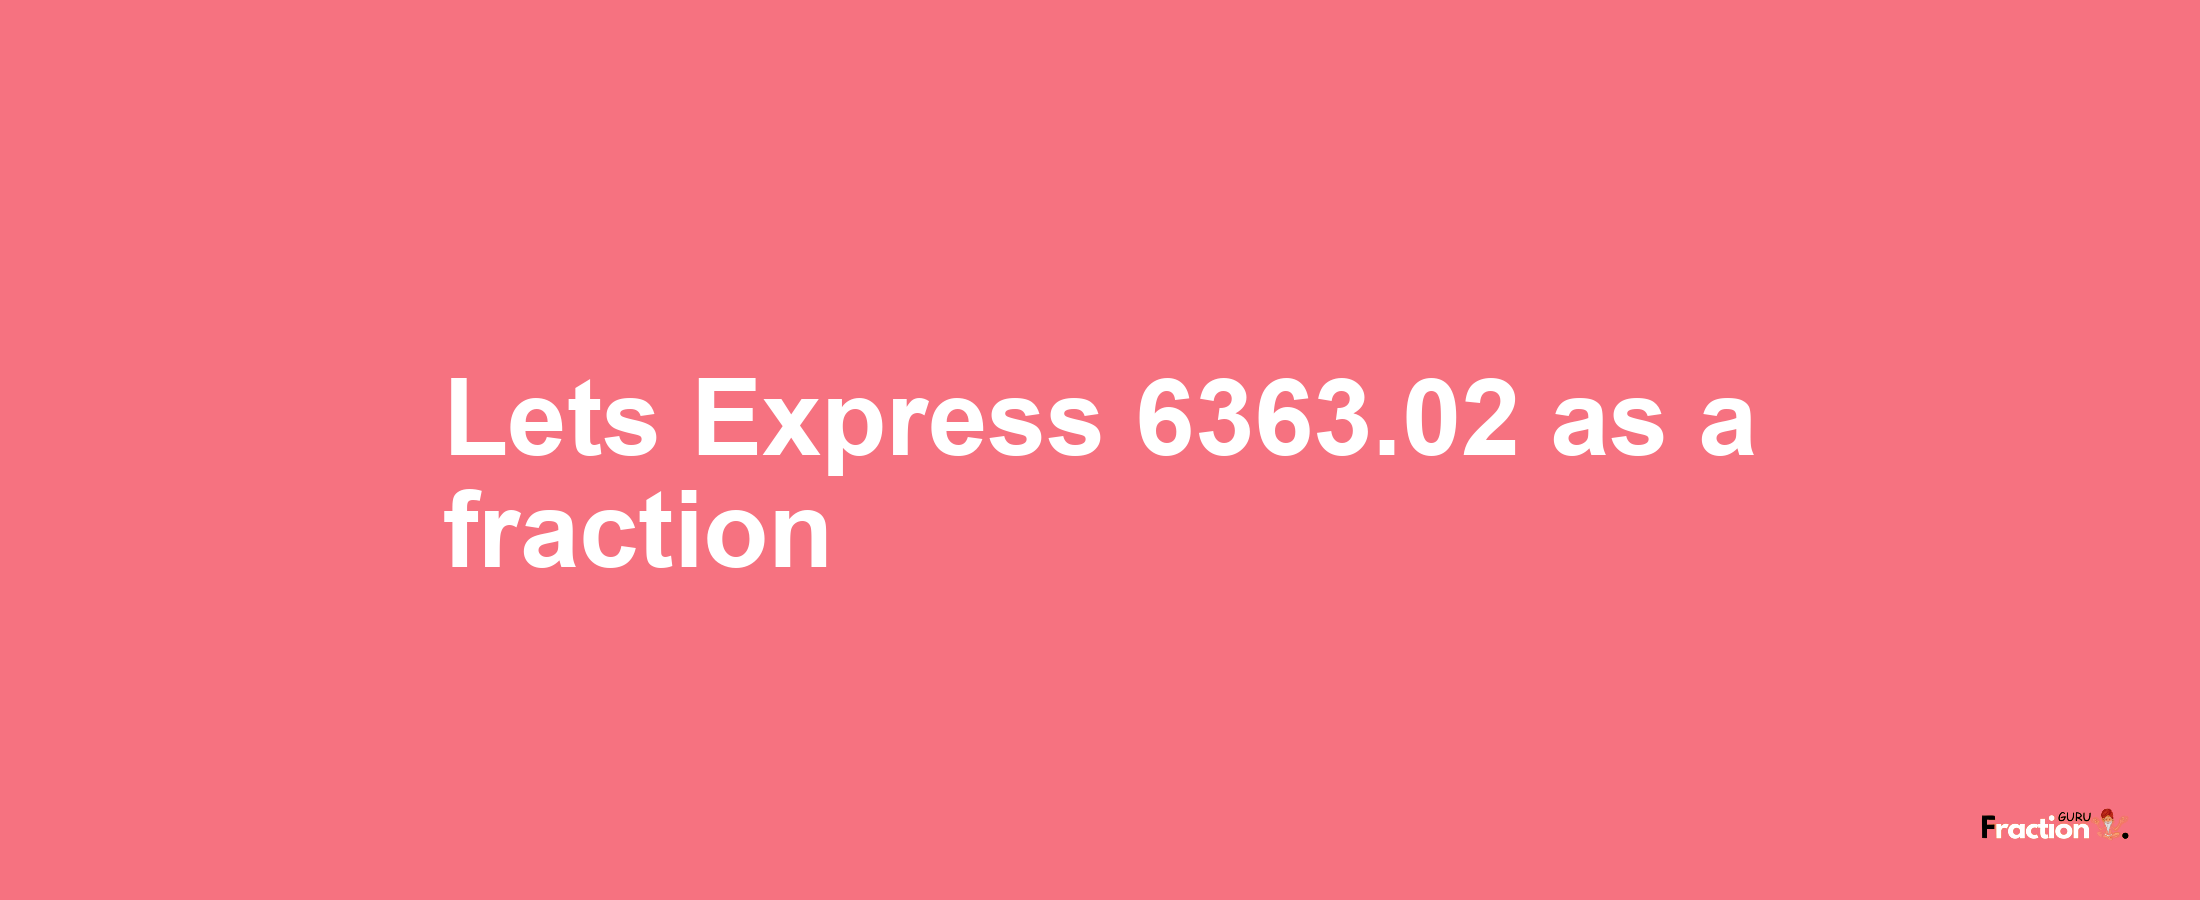 Lets Express 6363.02 as afraction